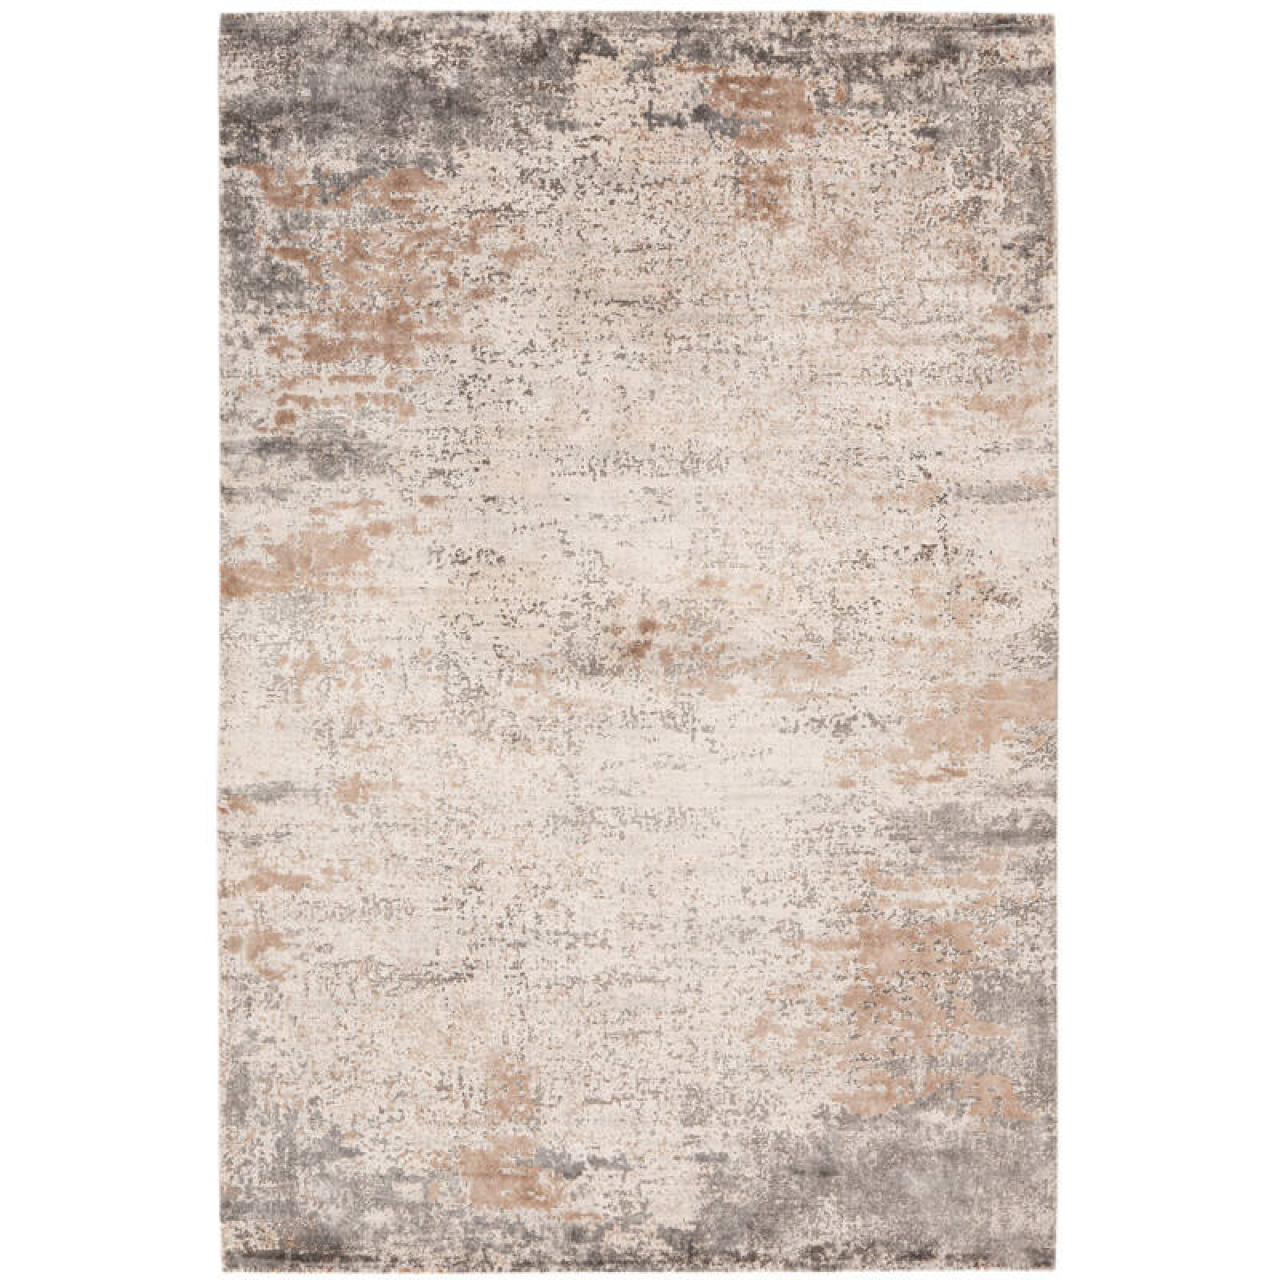 Obsession Haute Couture Jewel 953 Taupe szőnyeg-80x150